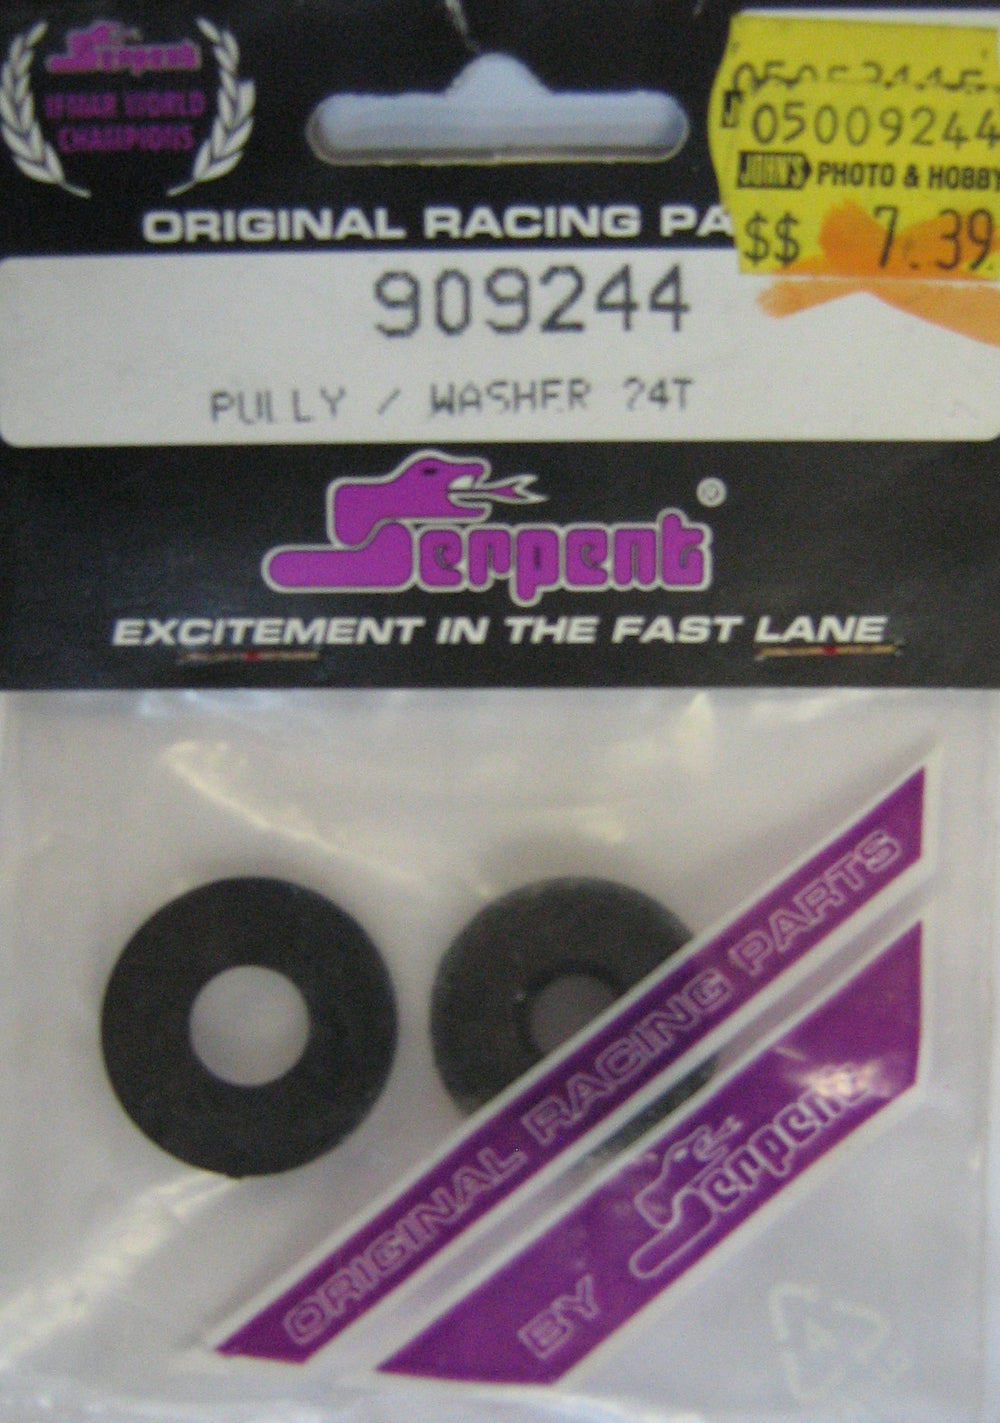 SERPENT # 909244 - PULLY/WASHER